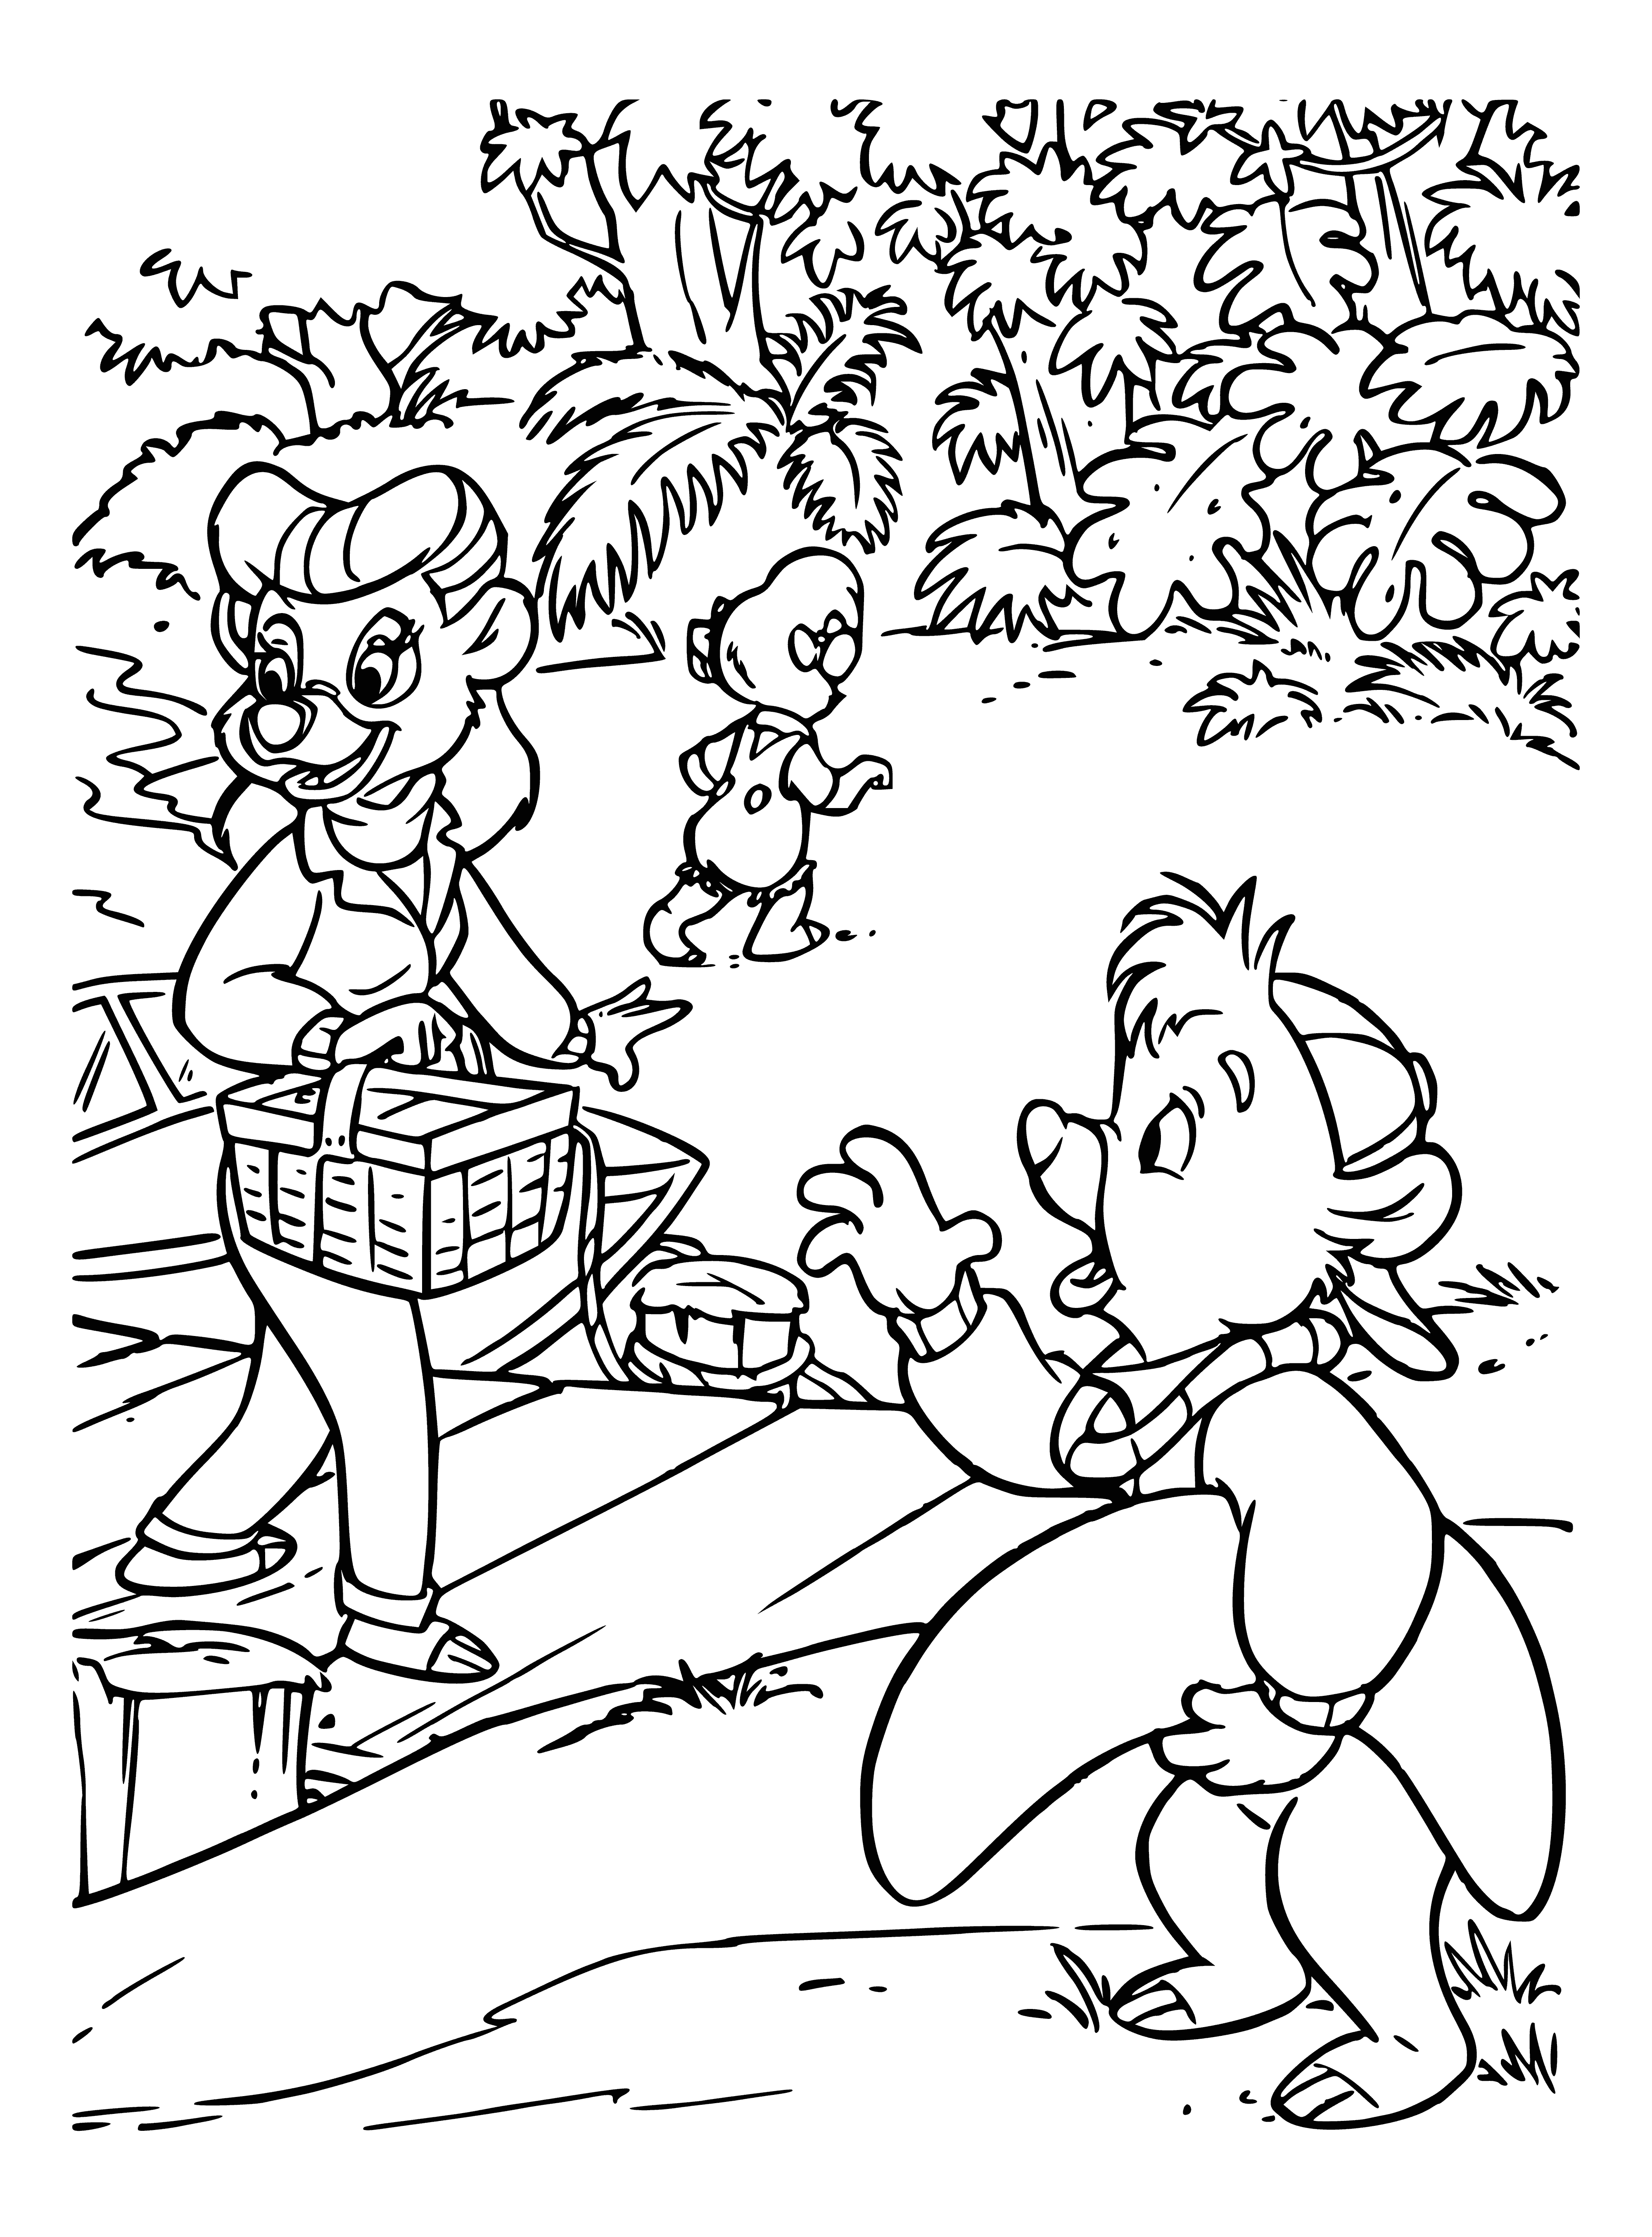 All are unloaded coloring page